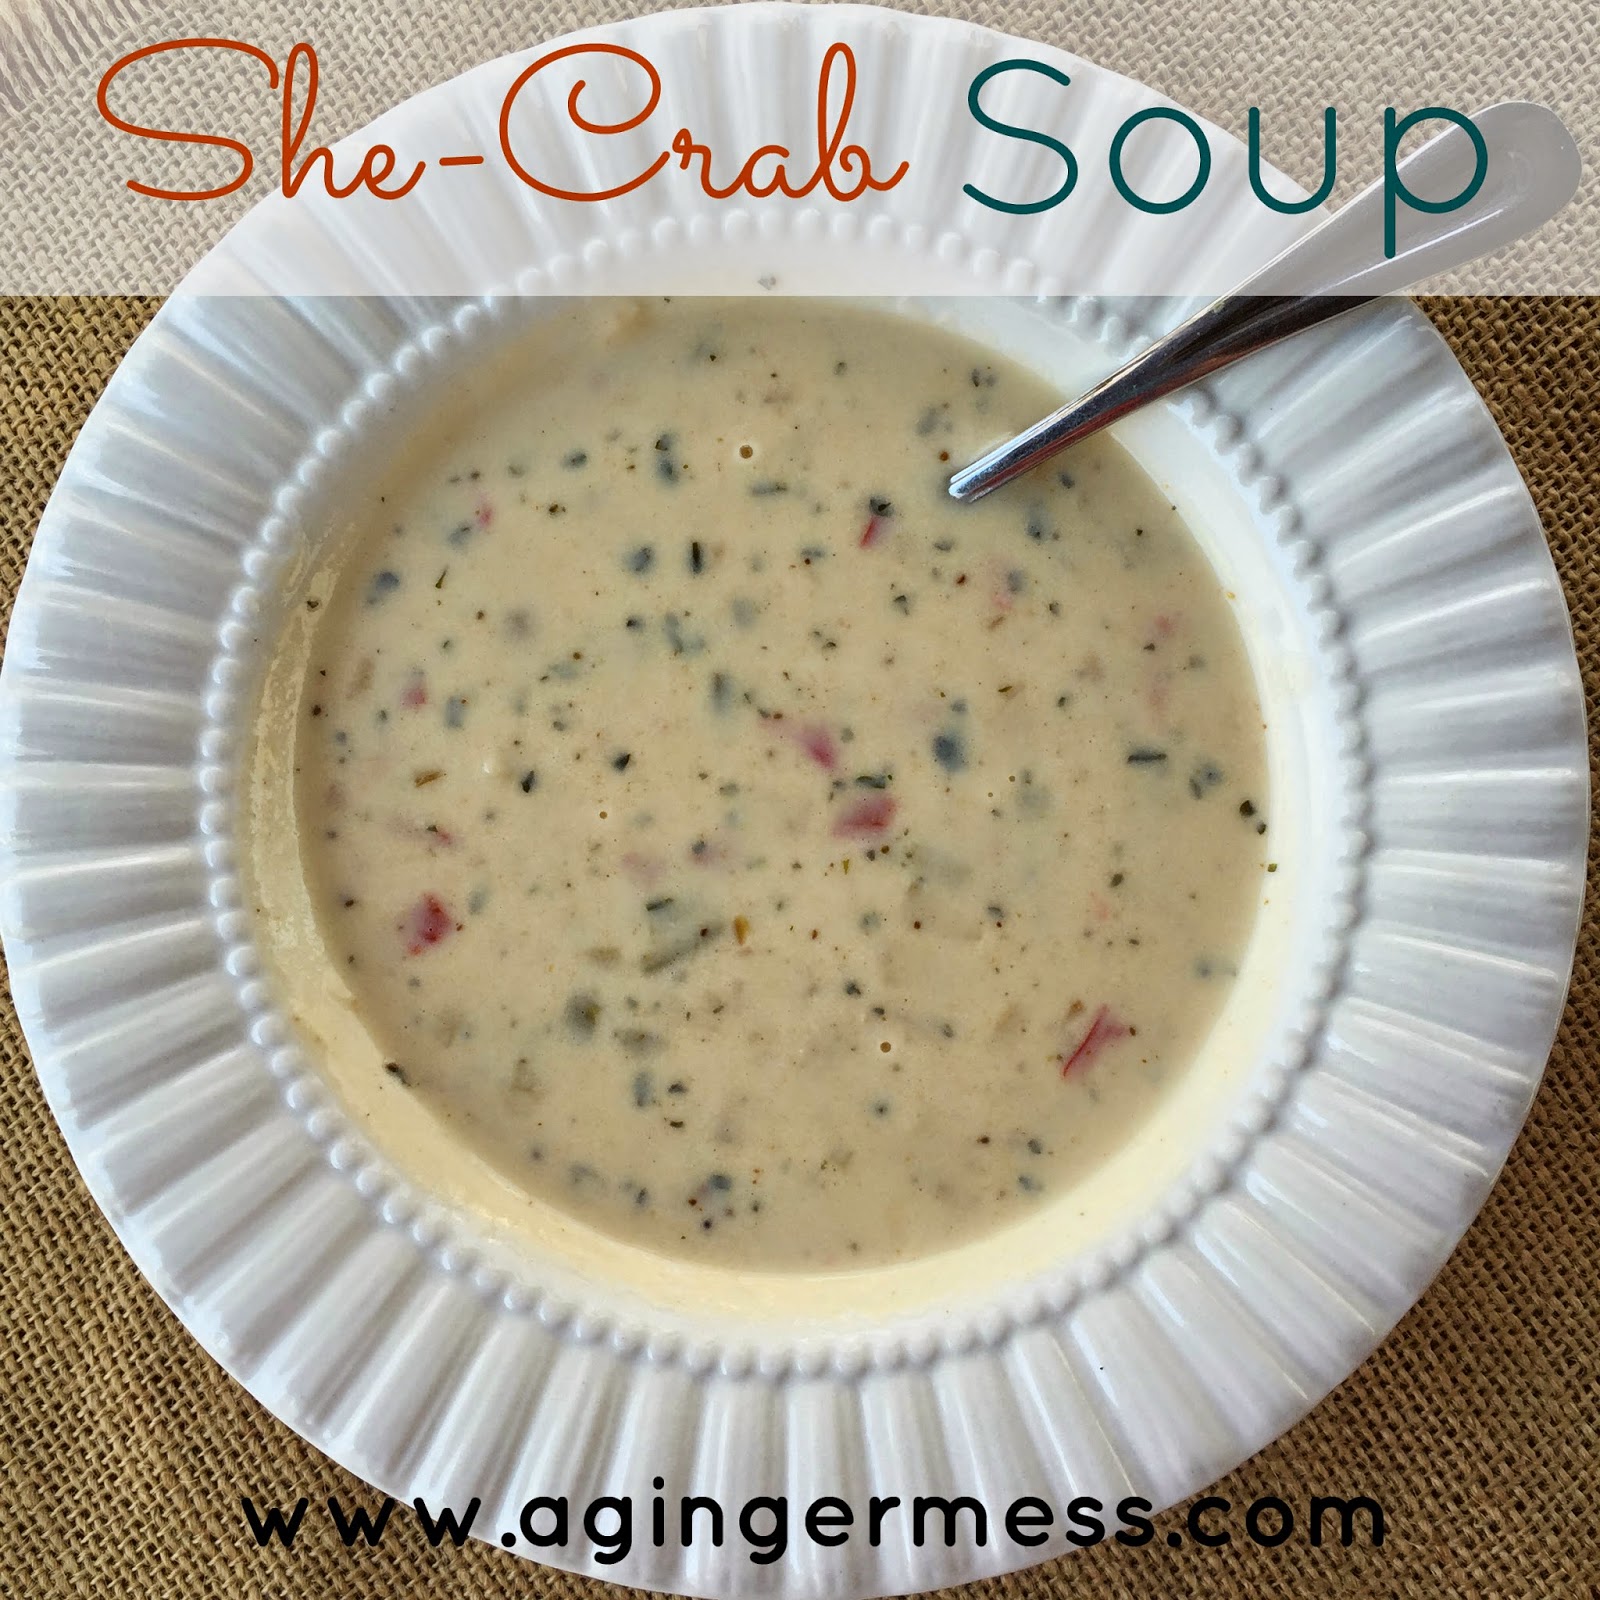 She-Crab Soup